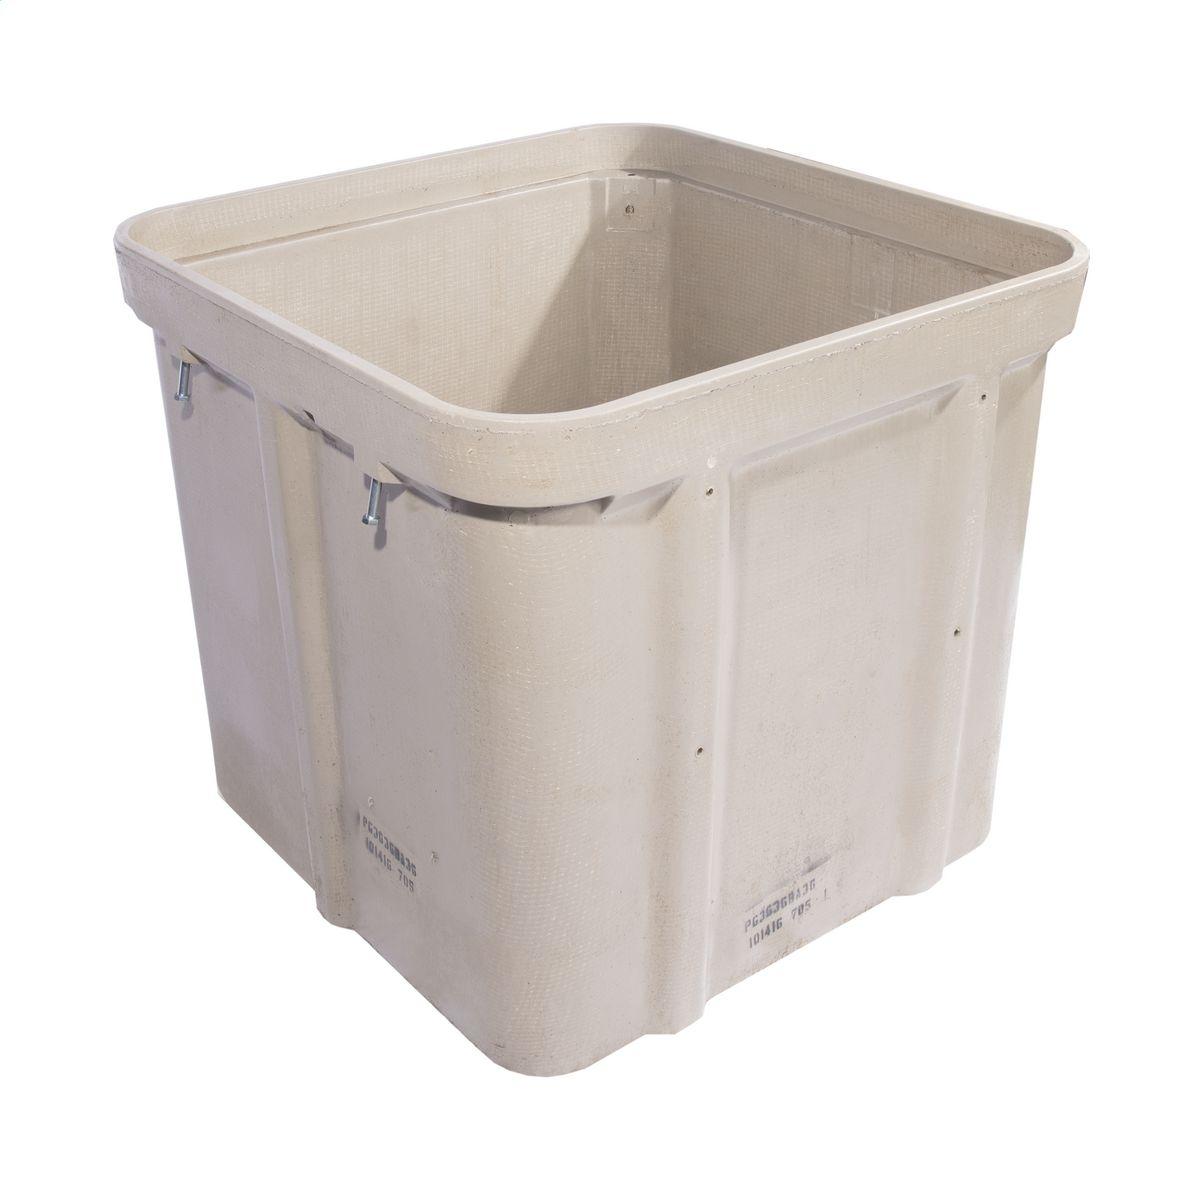 Hubbell PG3636BA36 Box, Polymer Concrete, Tier 22, 36"x36"X36", Straight Wall, Open Bottom 